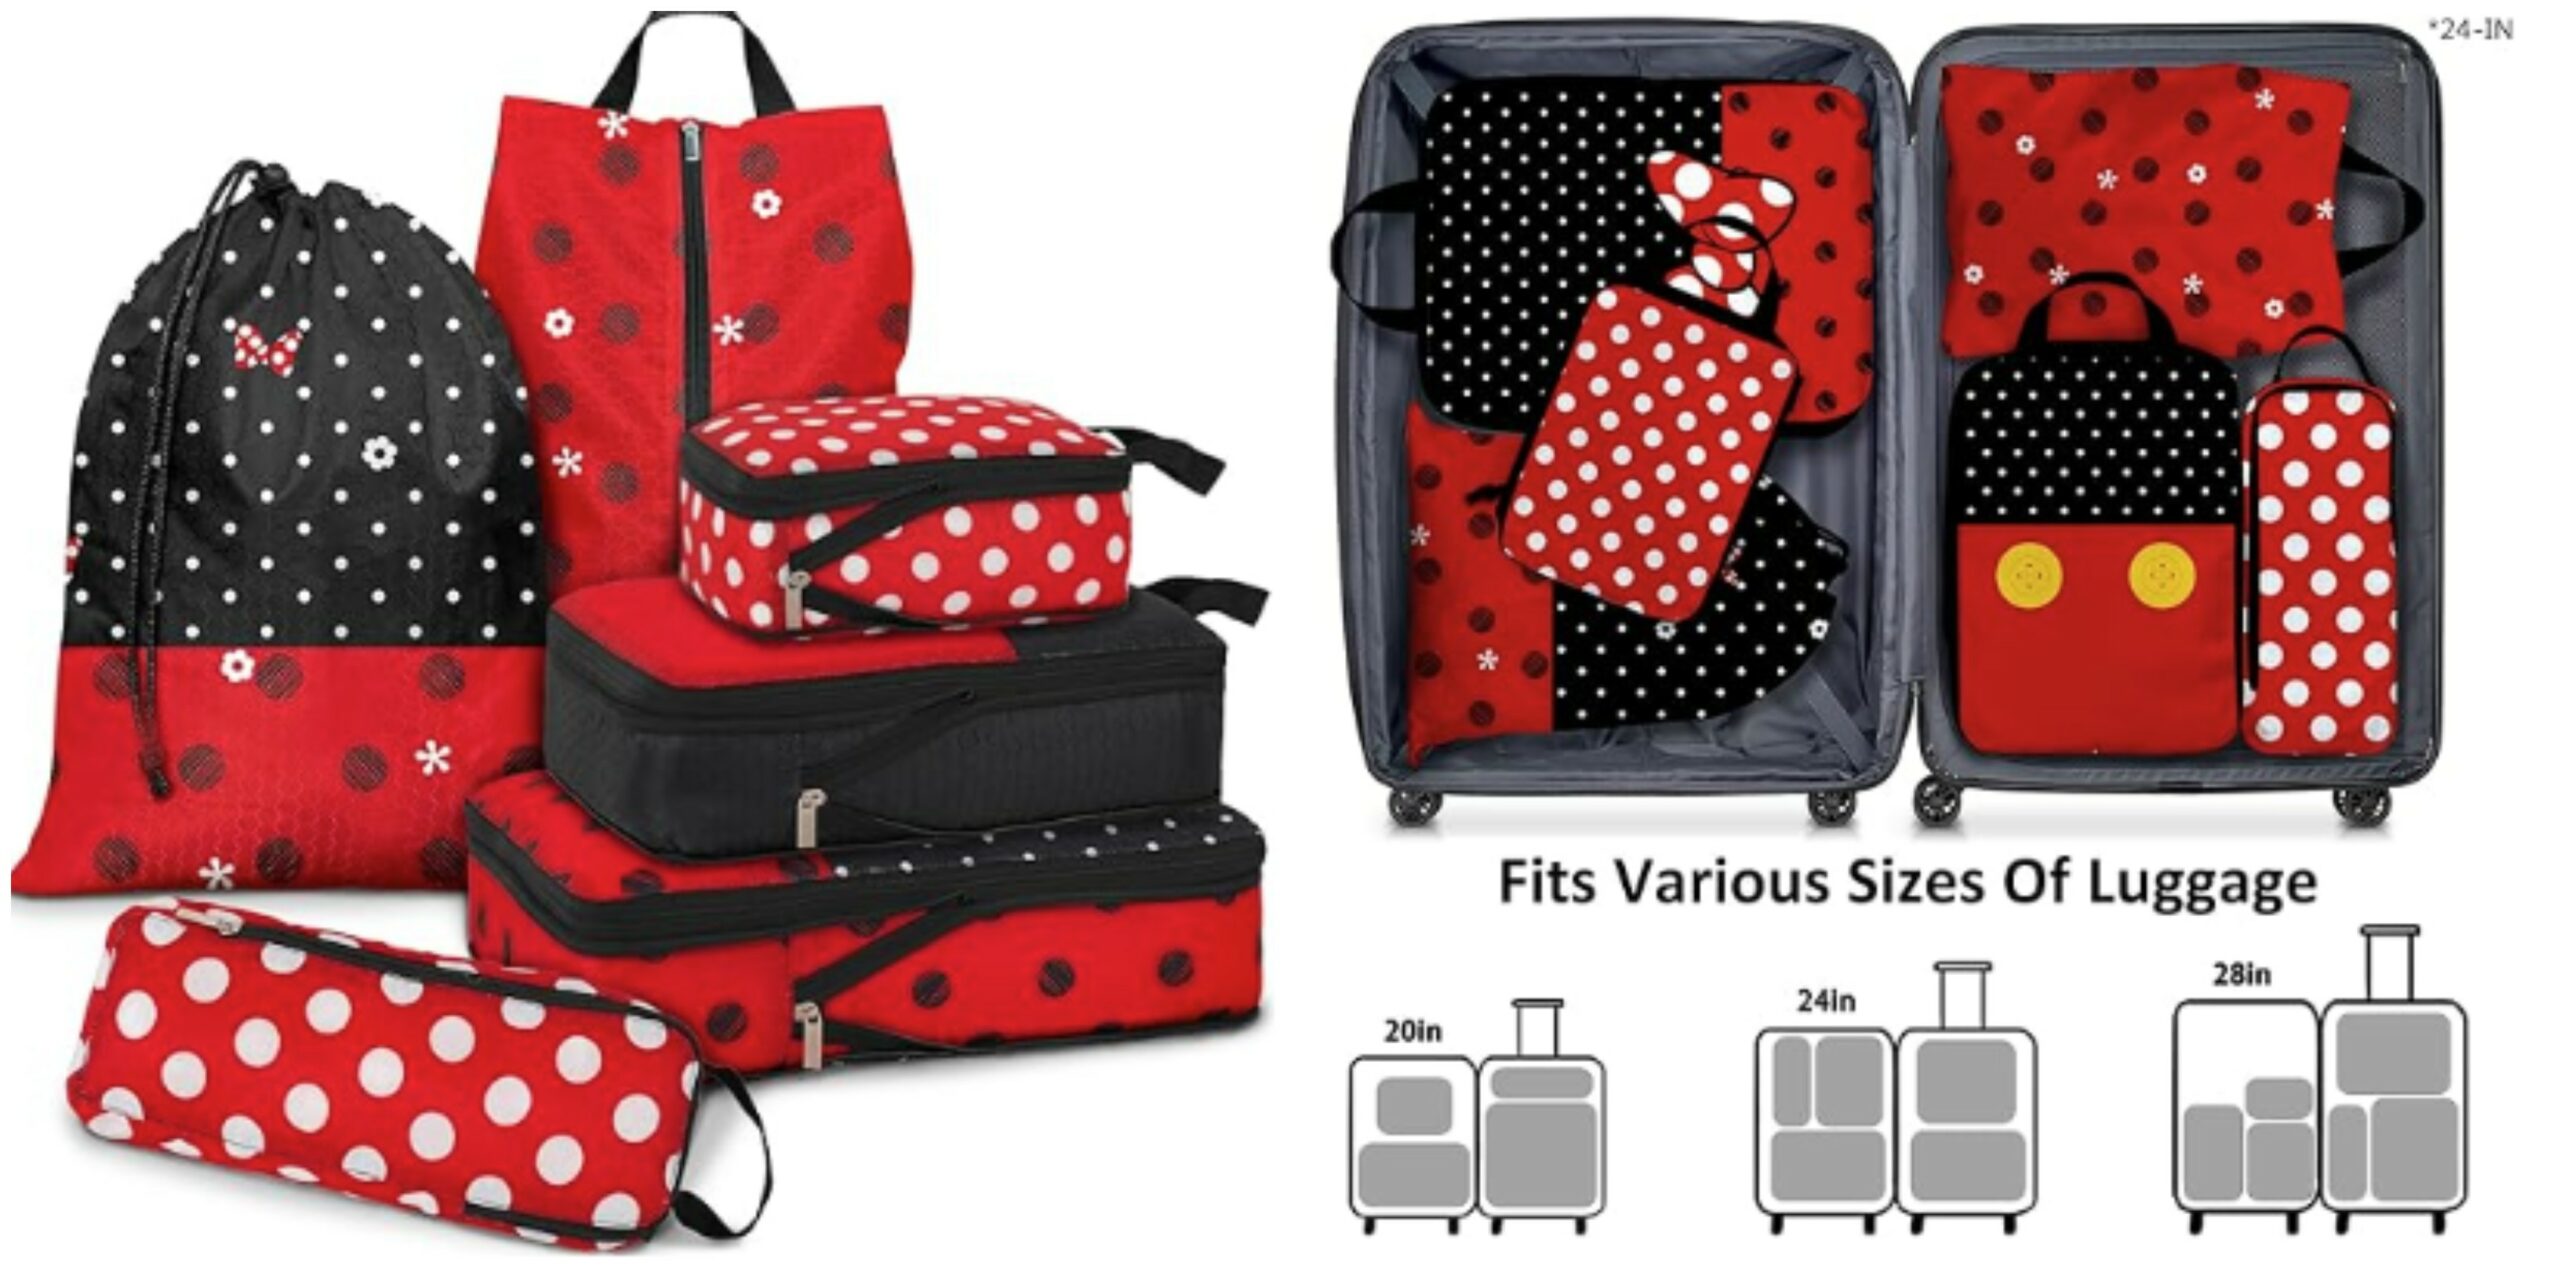 Disney-Inspired Compression Packing Cubes For Your Next Vacation